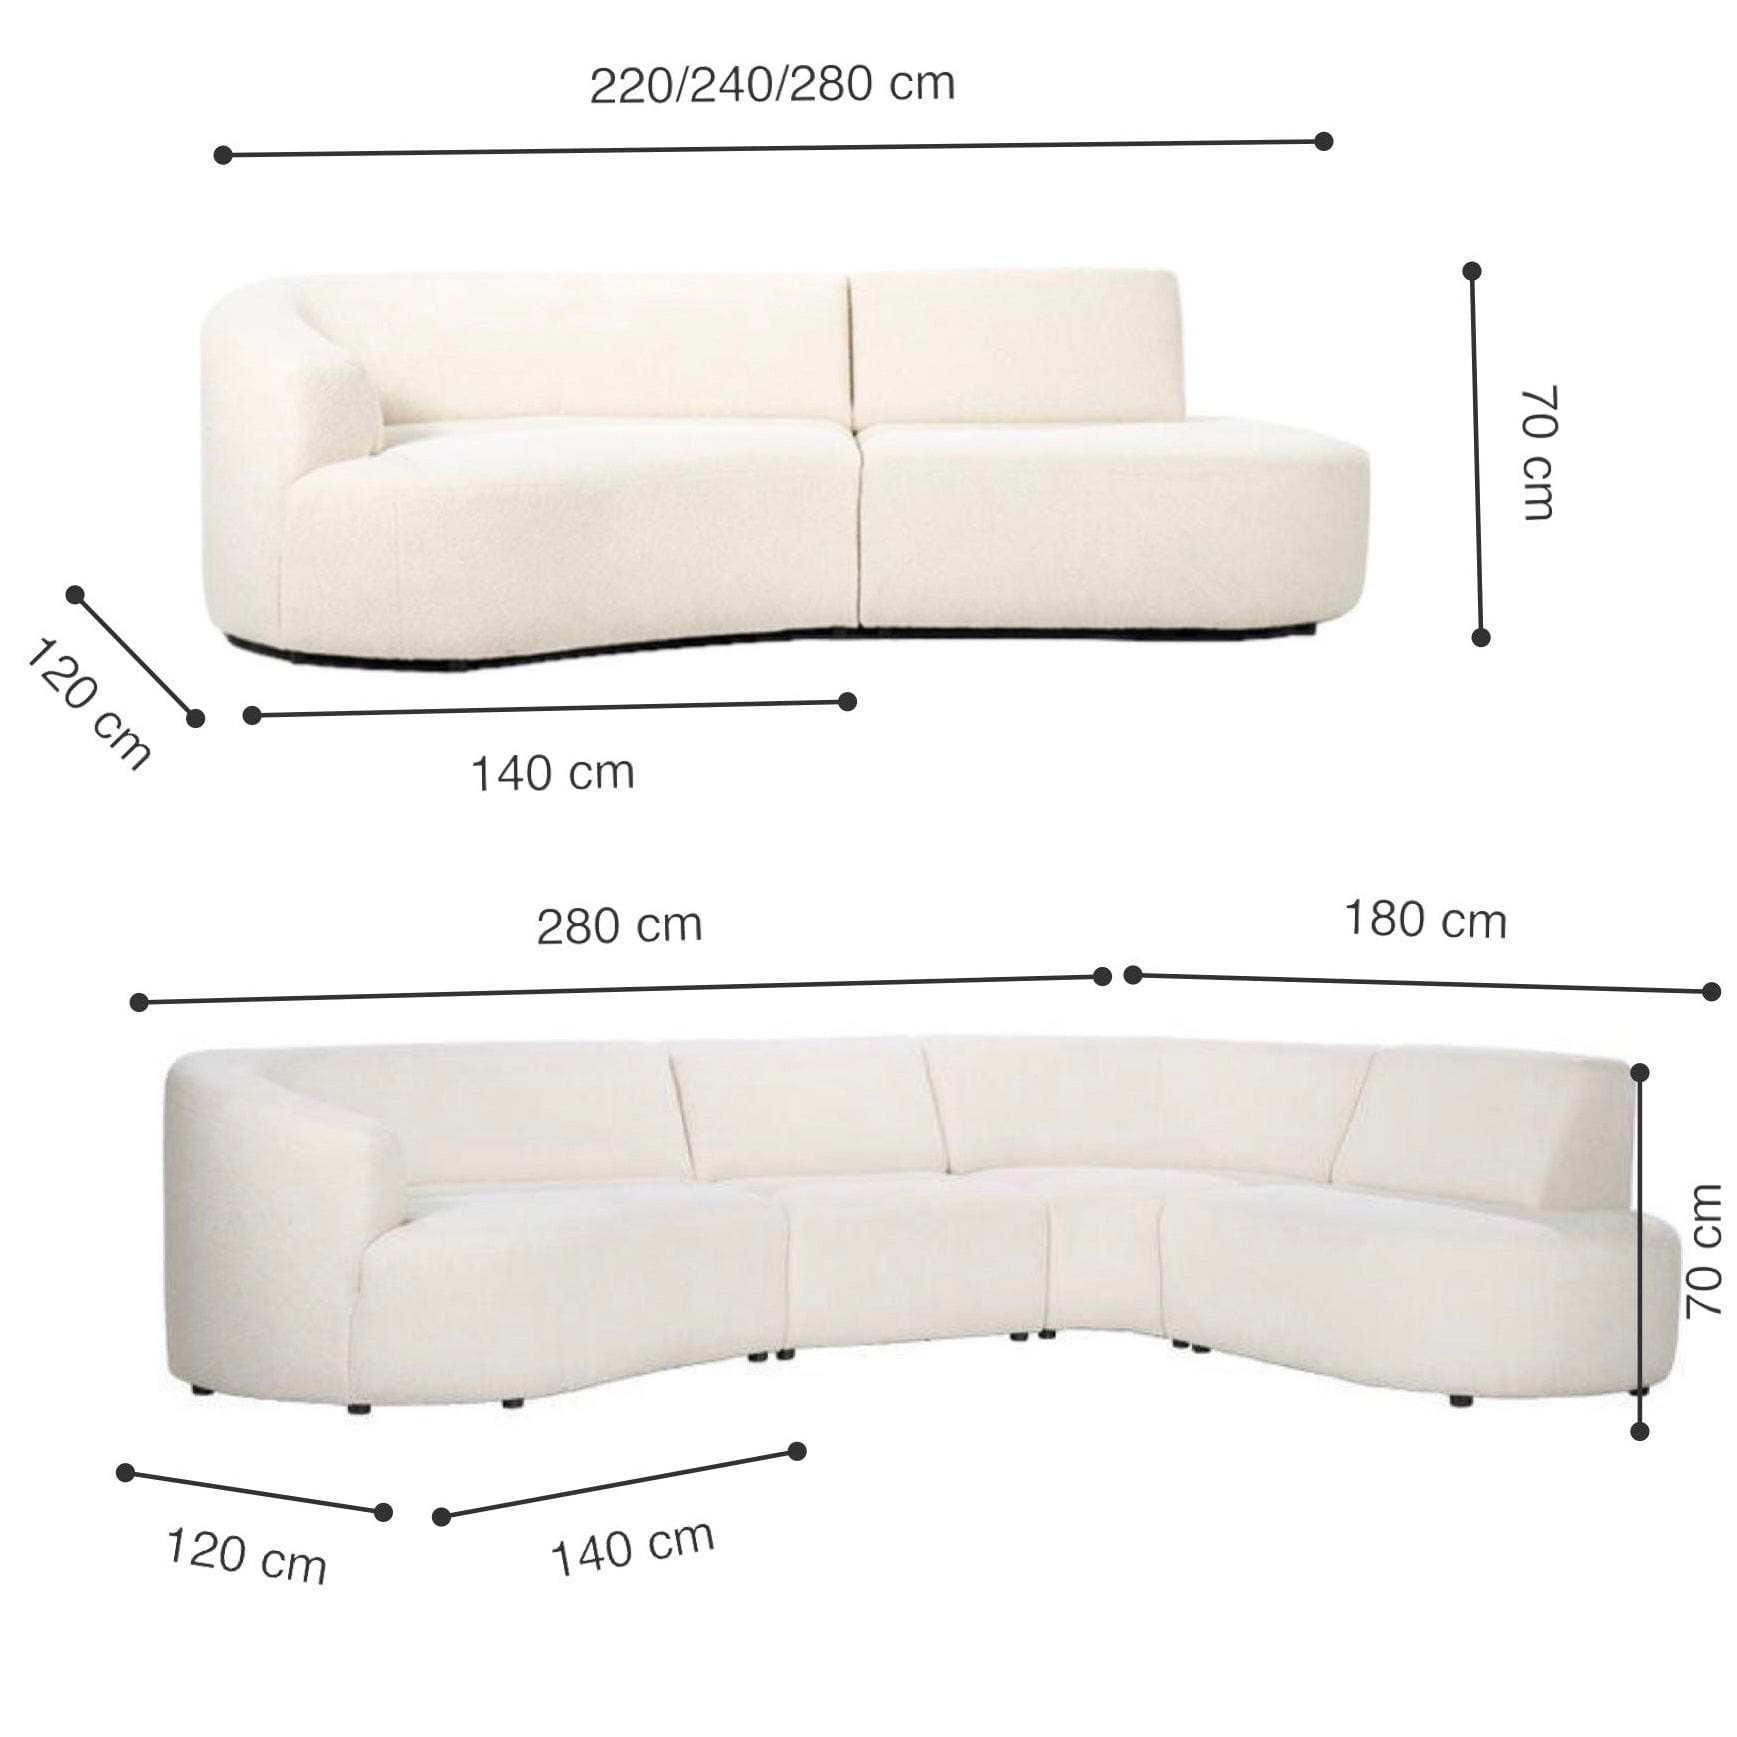 Home Atelier Performance Boucle Fabric / Length 250cm/ With Curve Chaise / Cream Ark Sectional Boucle Sofa